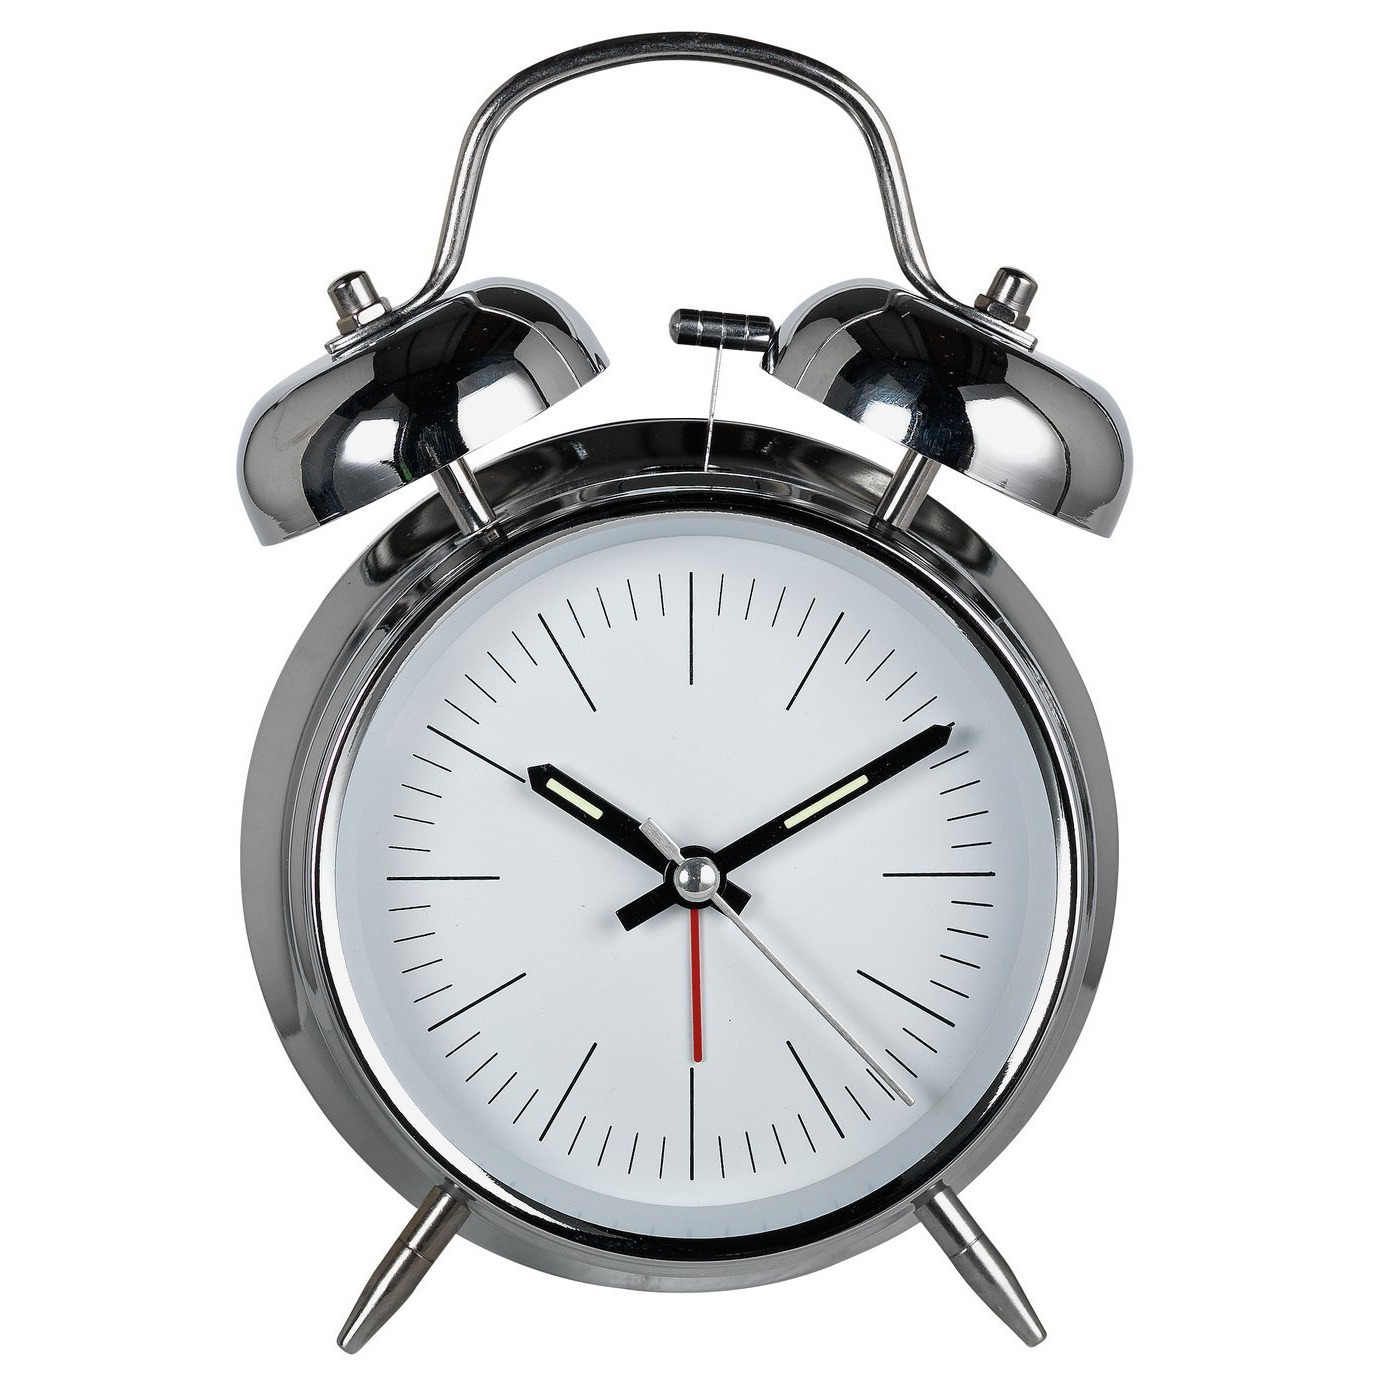 Constant Twin Bell Alarm Clock - Silver - image 1